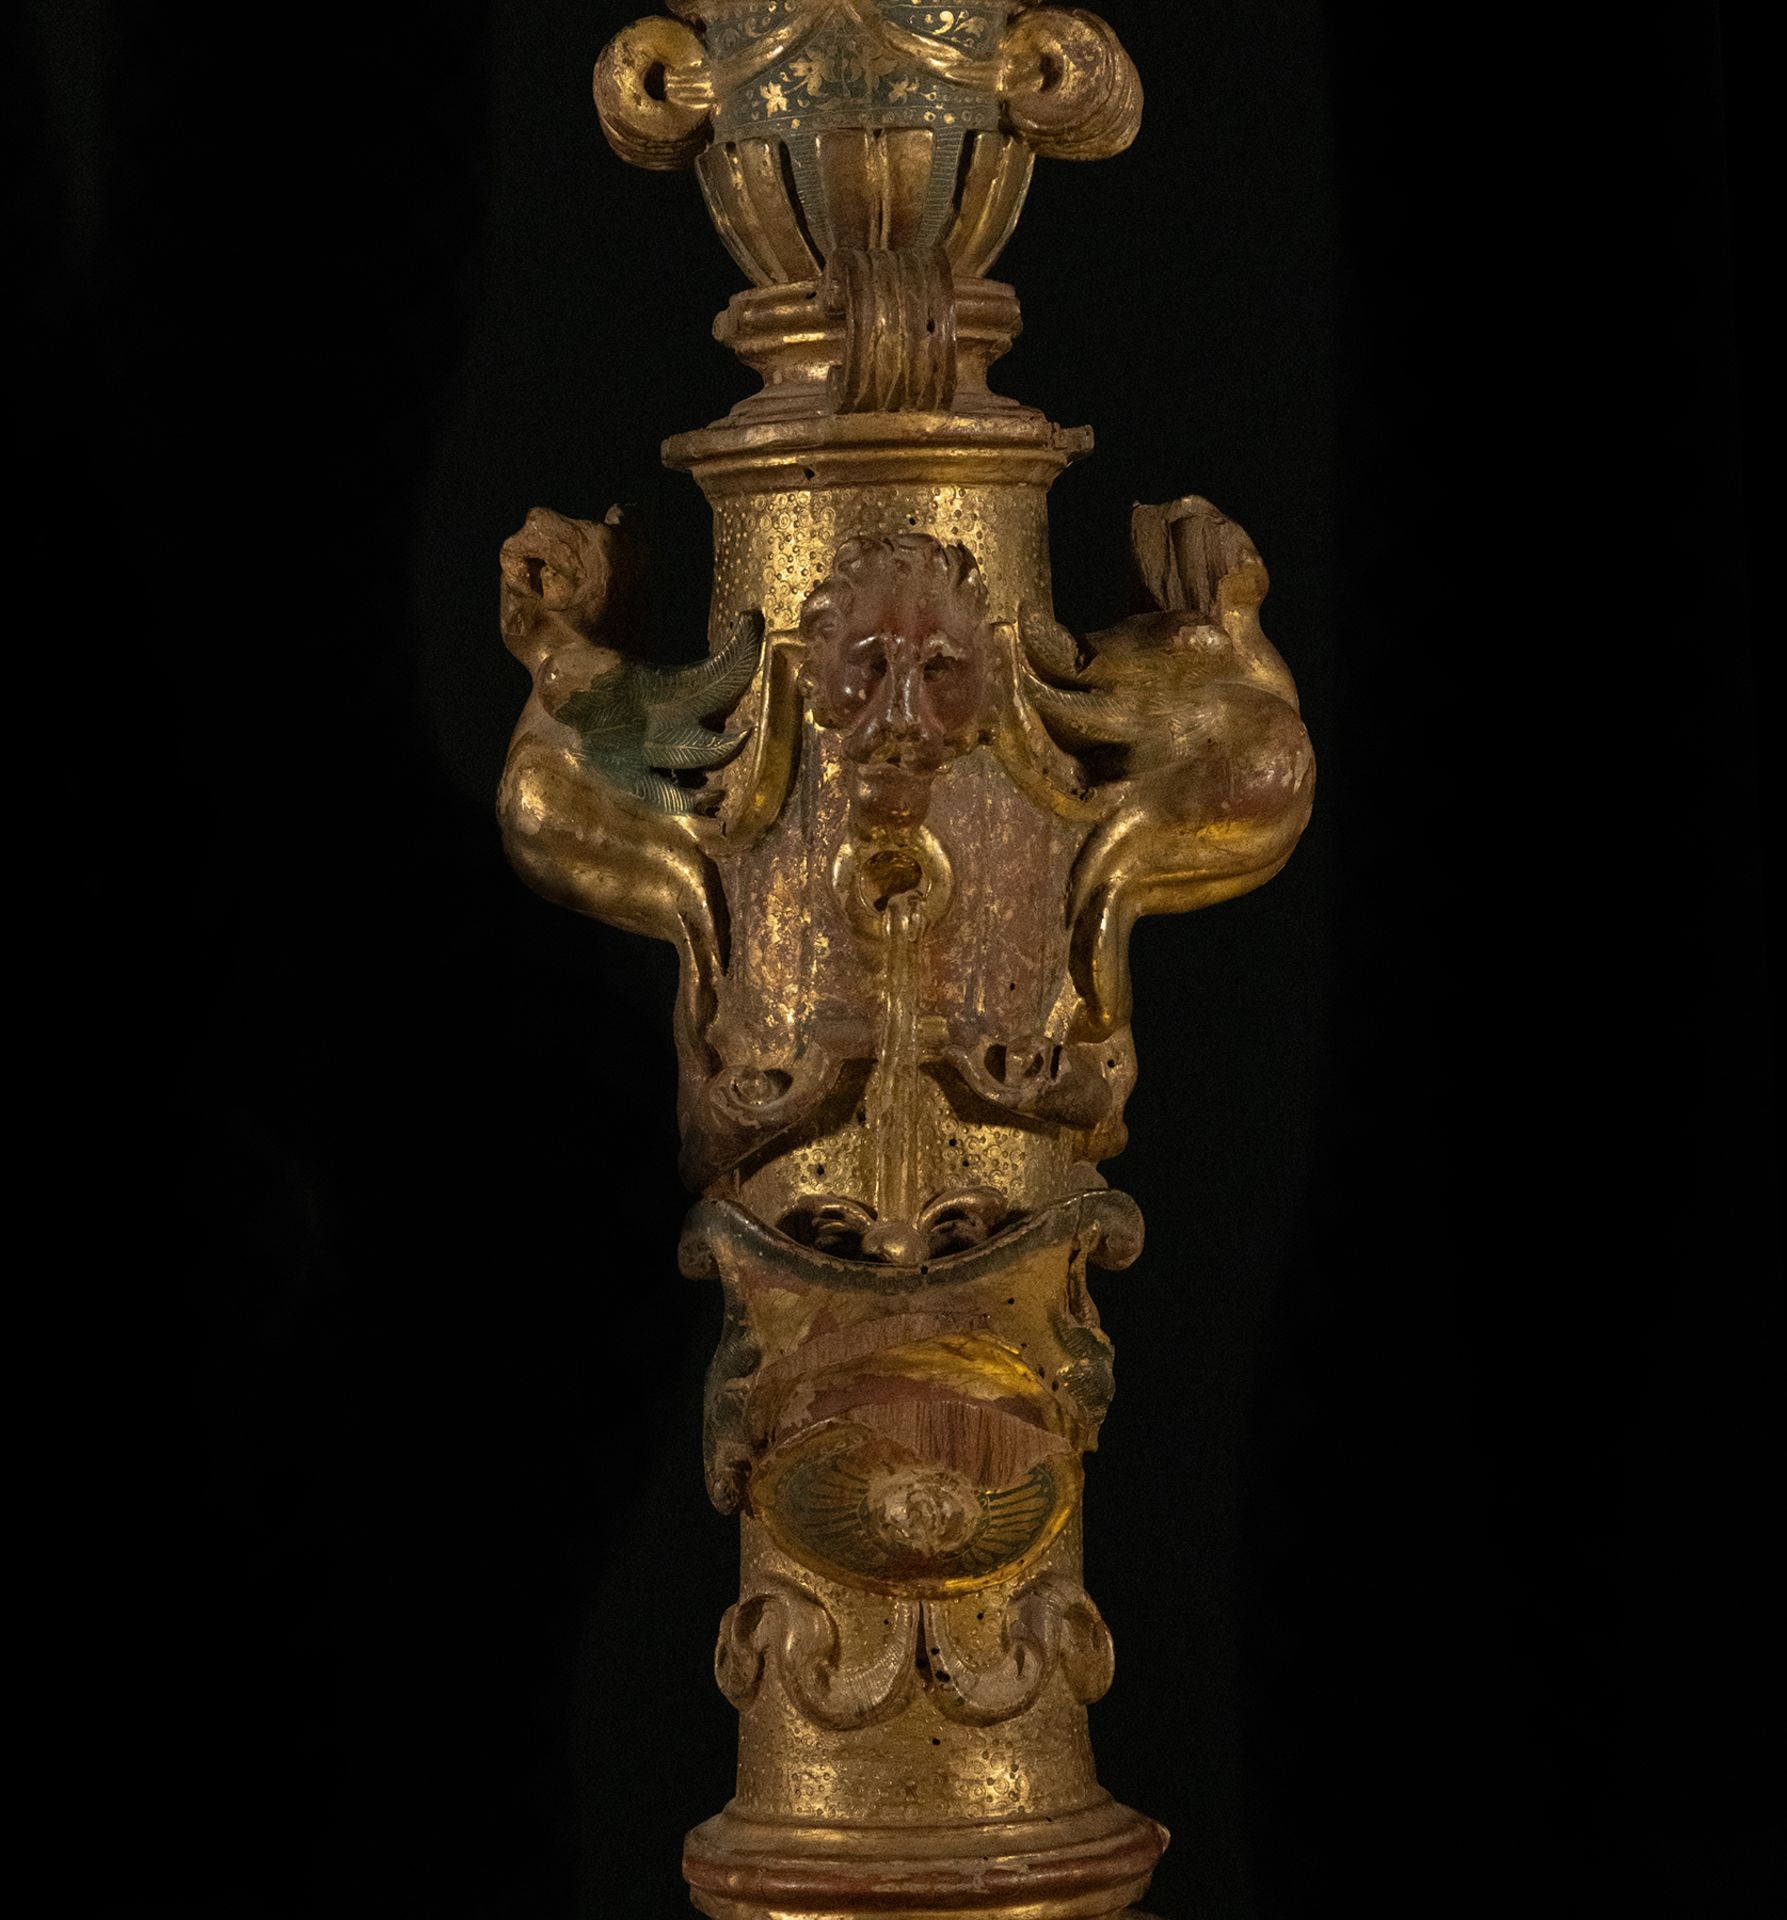 Pair of important Plateresque columns in carved and gilded wood, circle or workshop by Alonso Berrug - Image 9 of 9